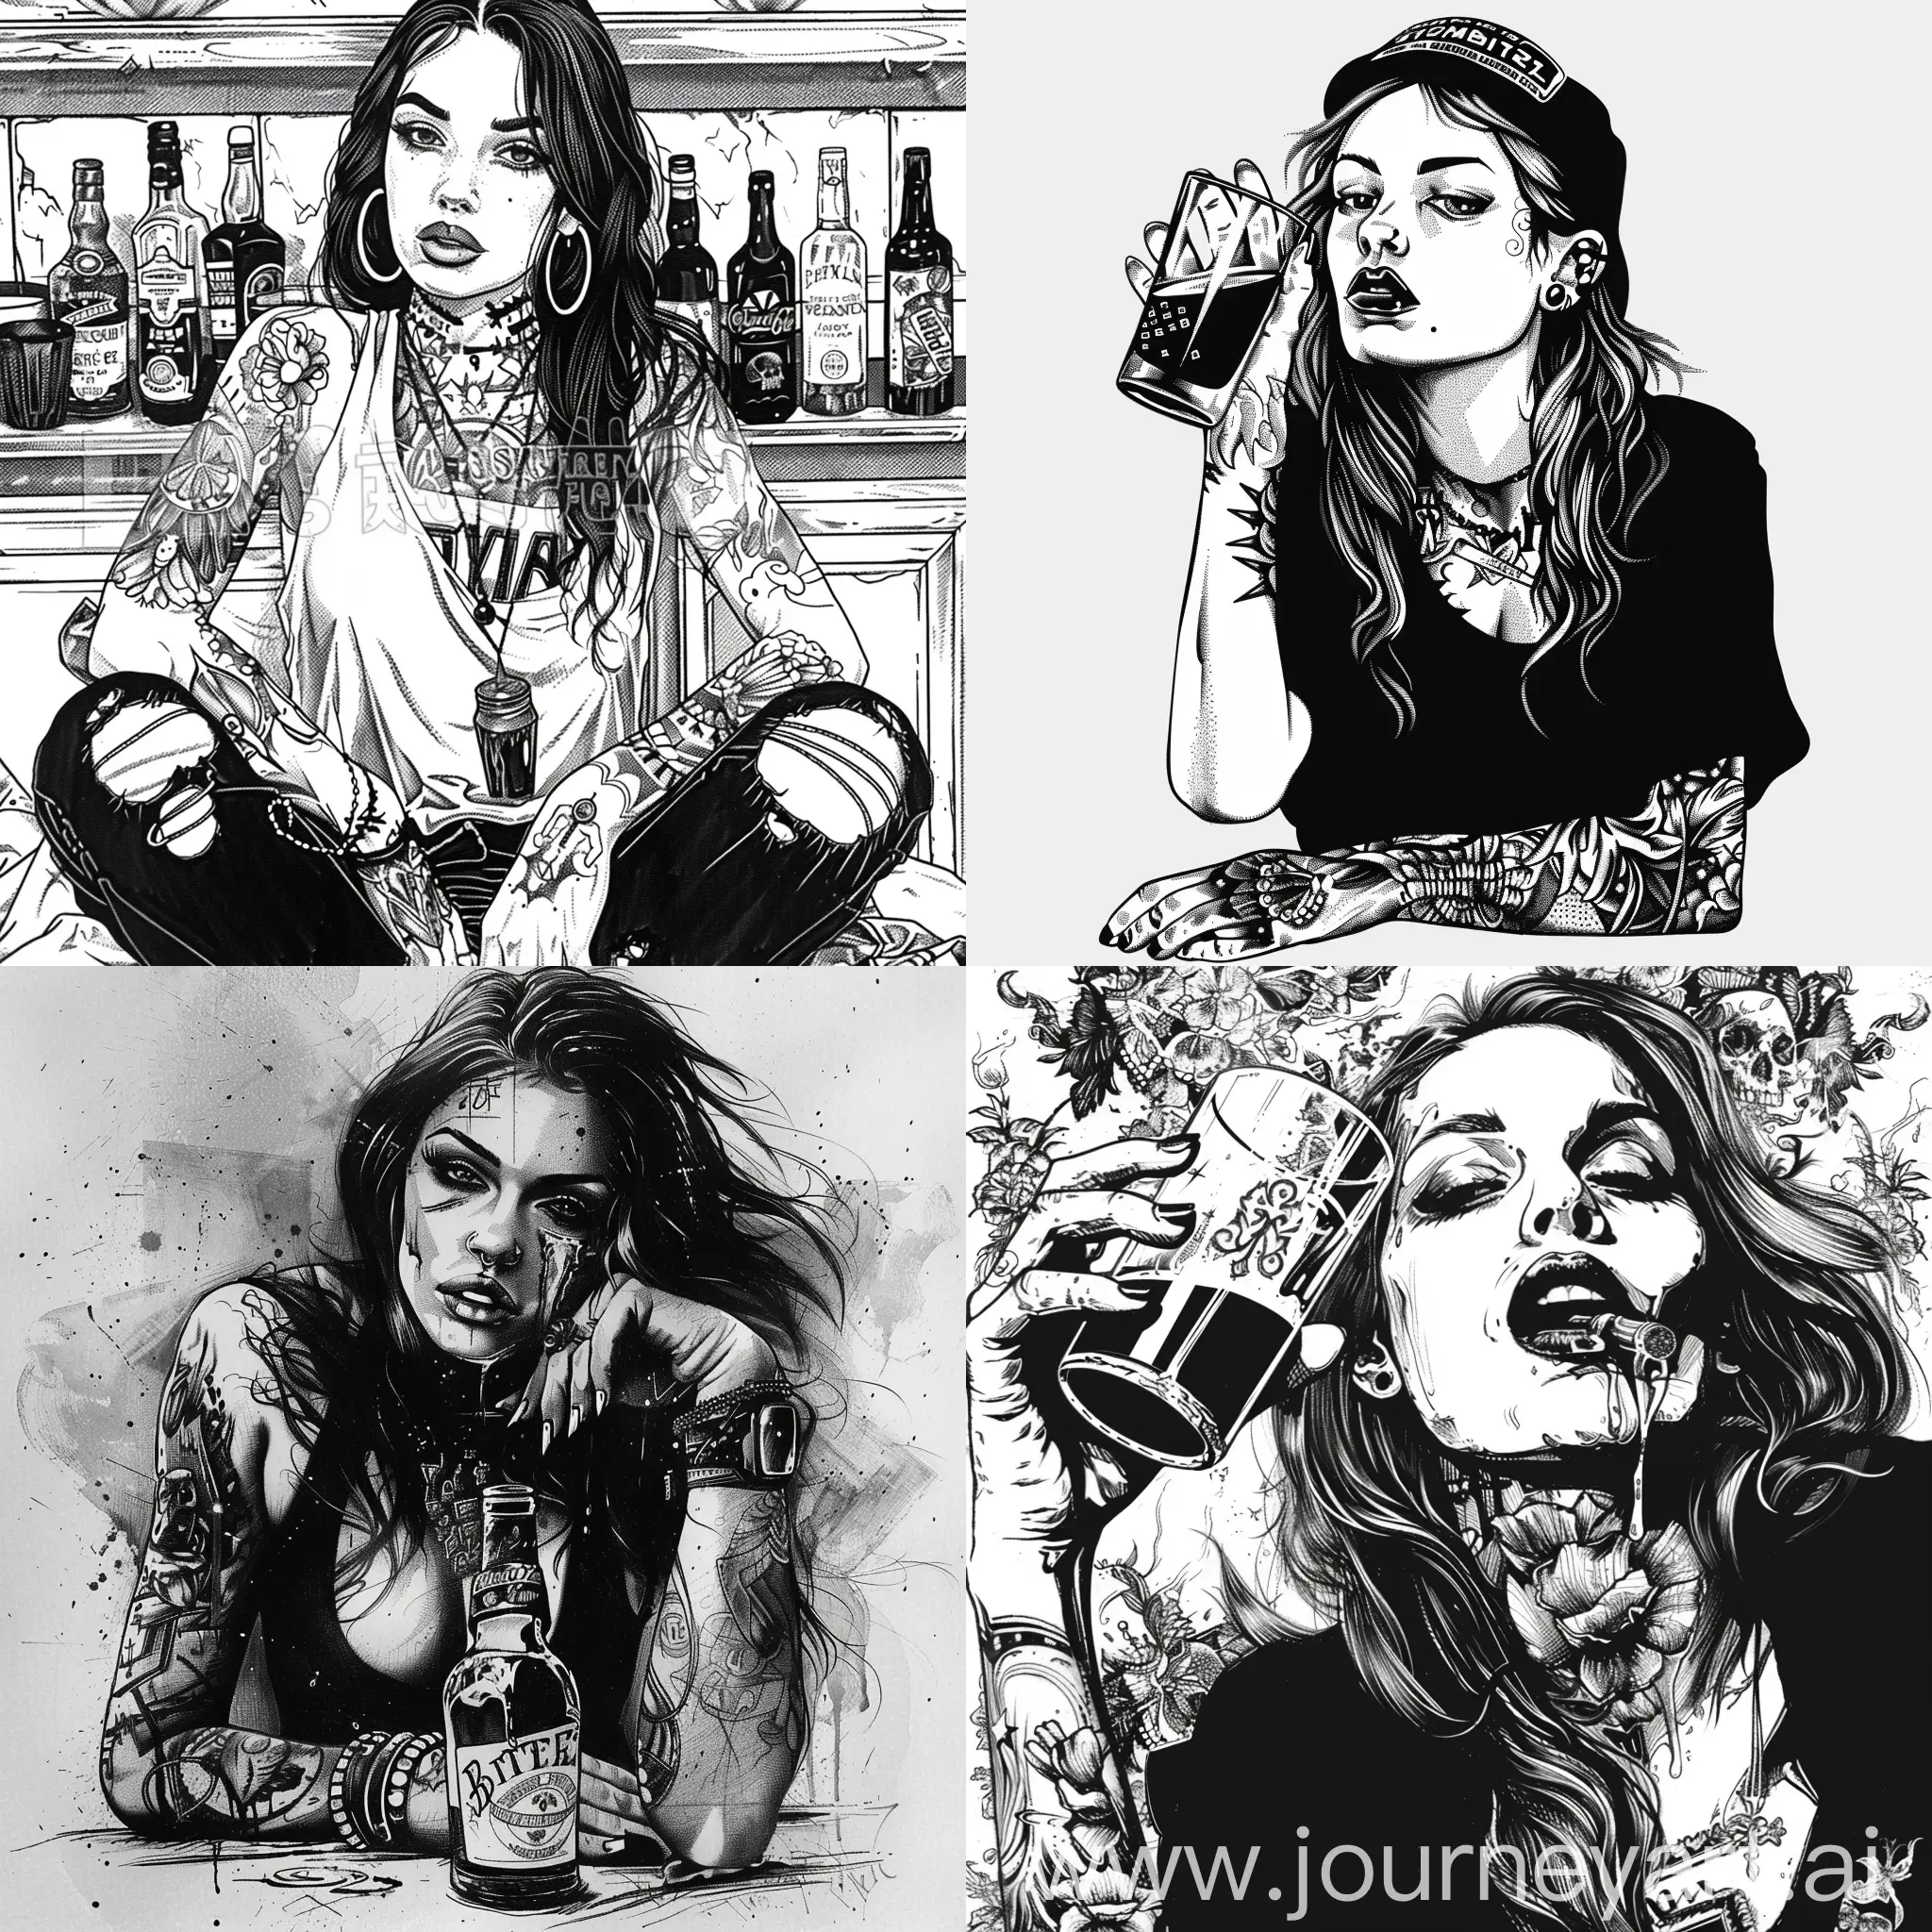 Girl-Making-Alcohol-in-Tattoo-Style-Black-and-White-Art